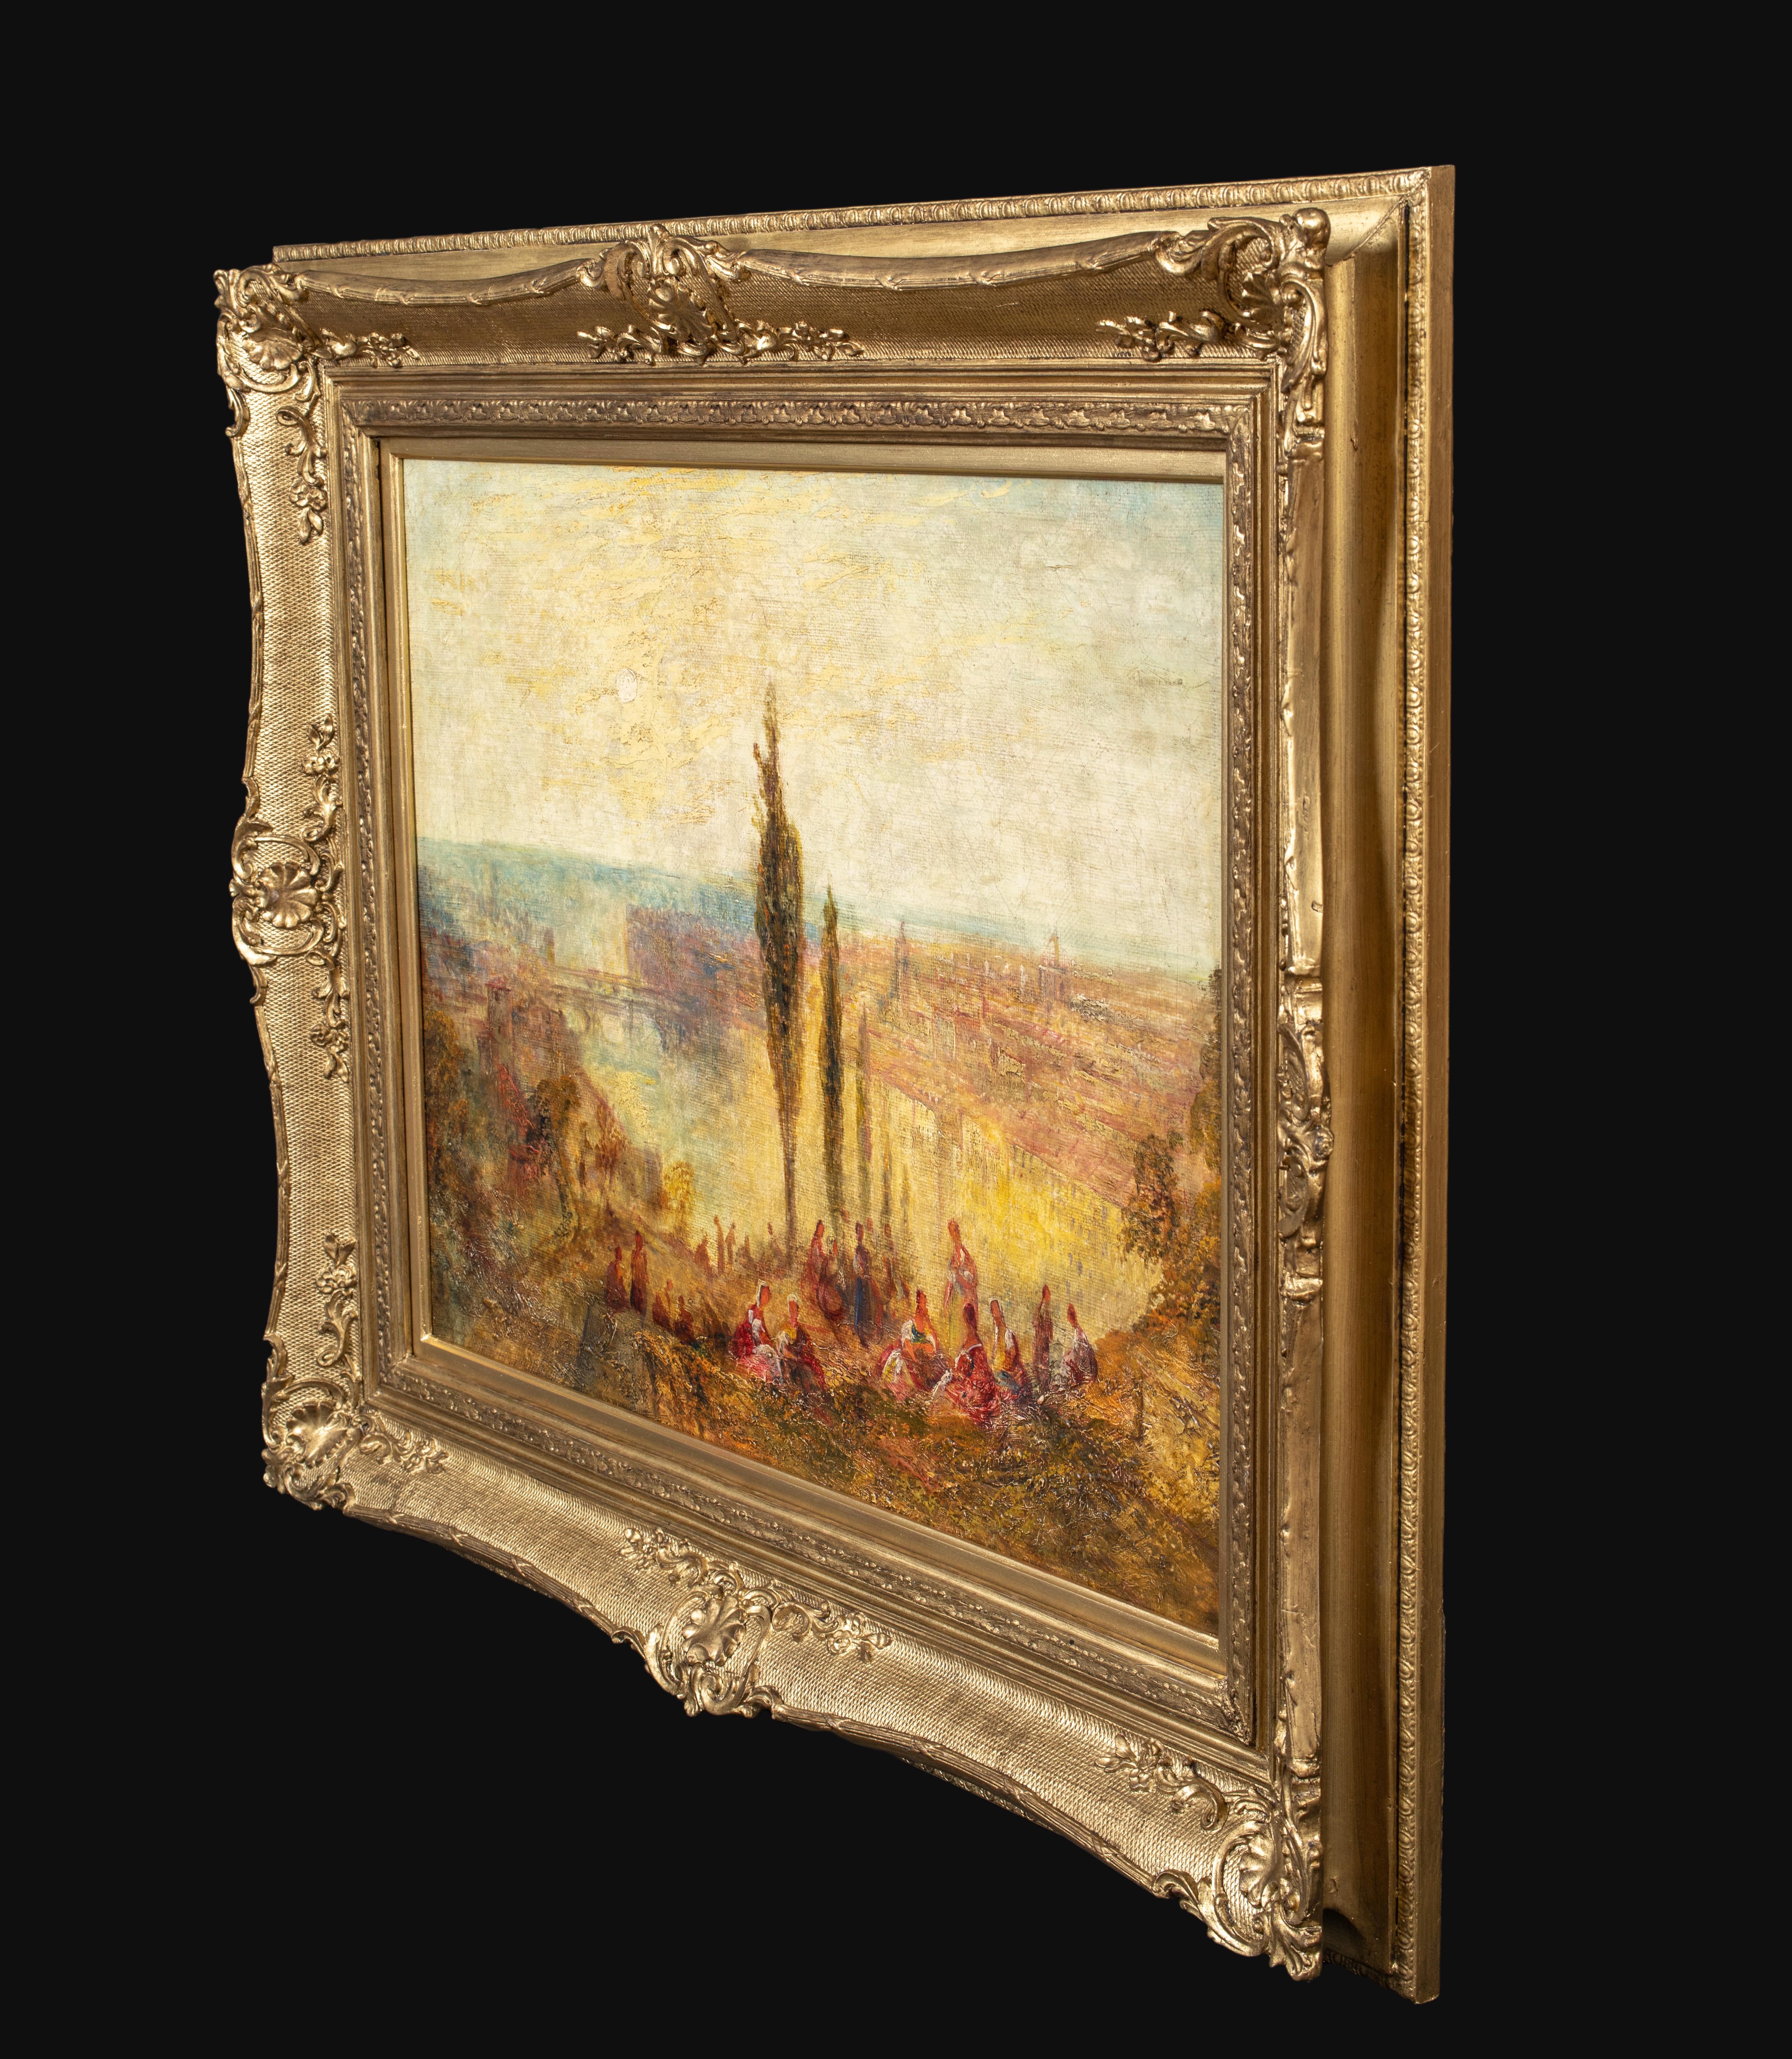 Florence Near San Miniato, 19th Century  JMW TURNER (1789-1862)  - Brown Landscape Painting by Joseph Mallord William Turner